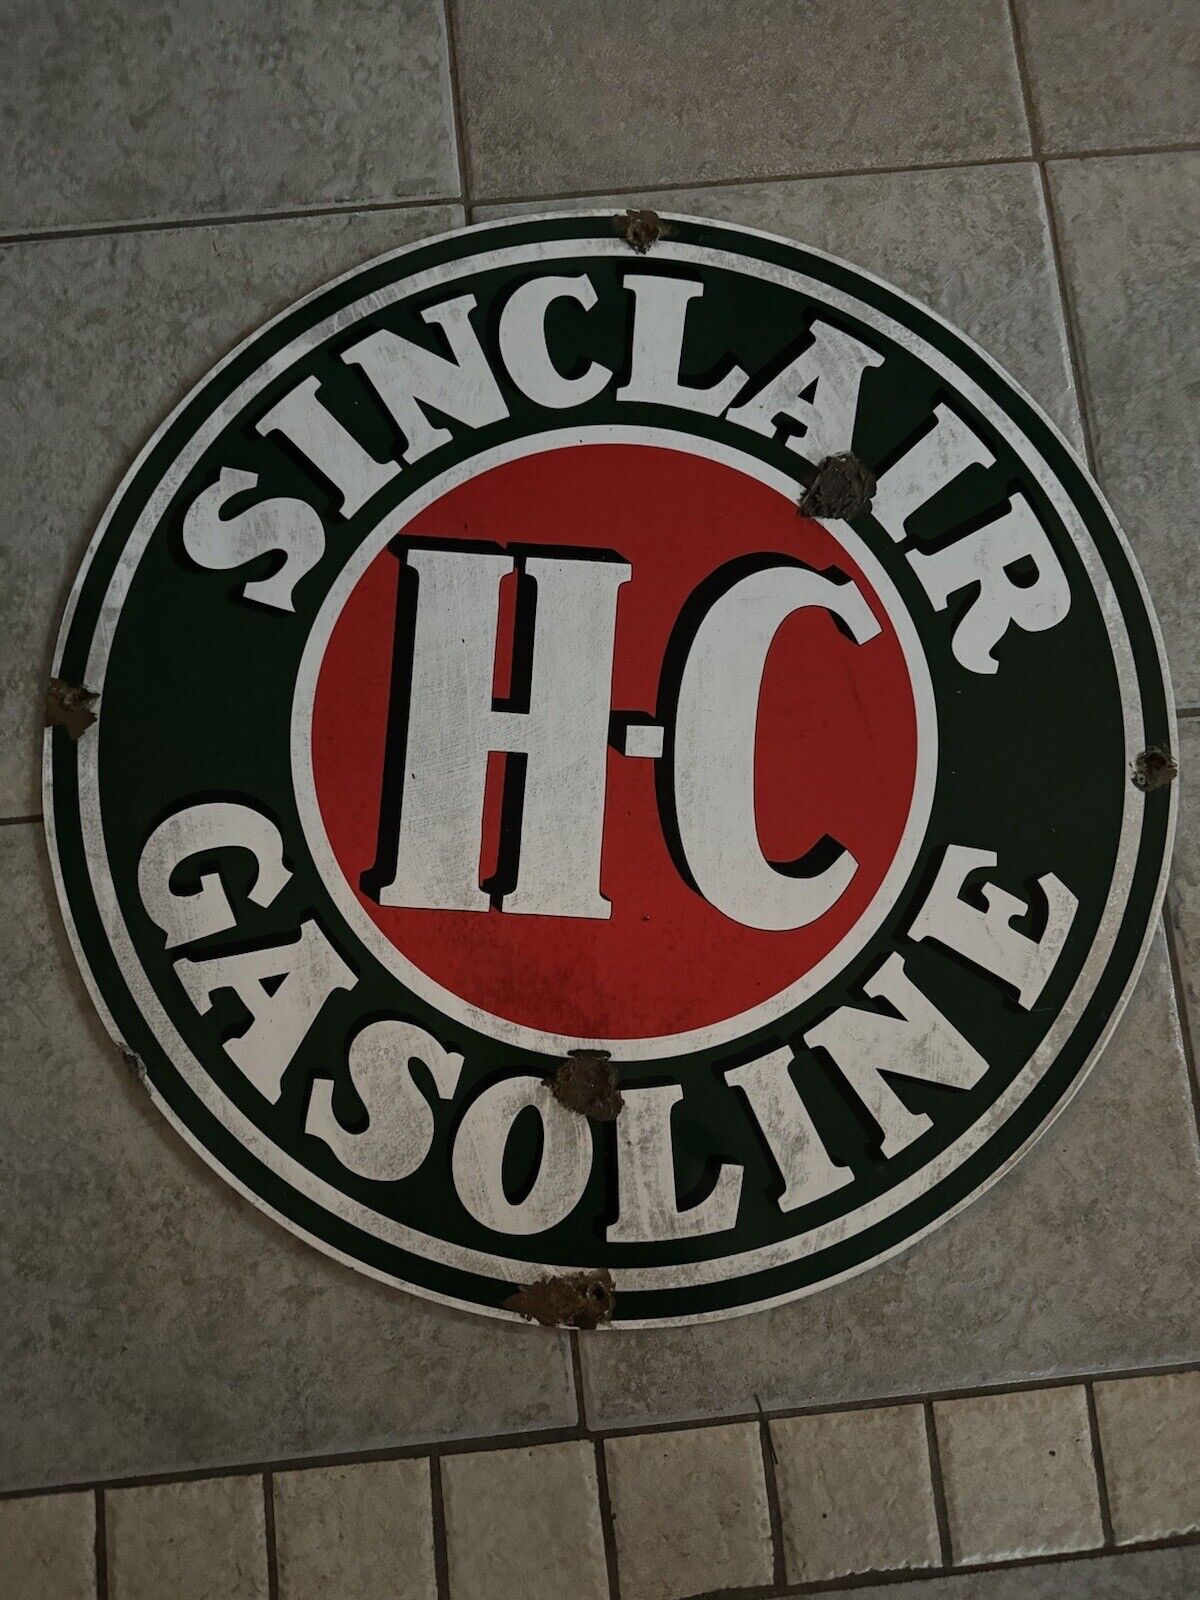 Antique style-barn find look Sinclair Dino H-C dealer sales service gas oil sign